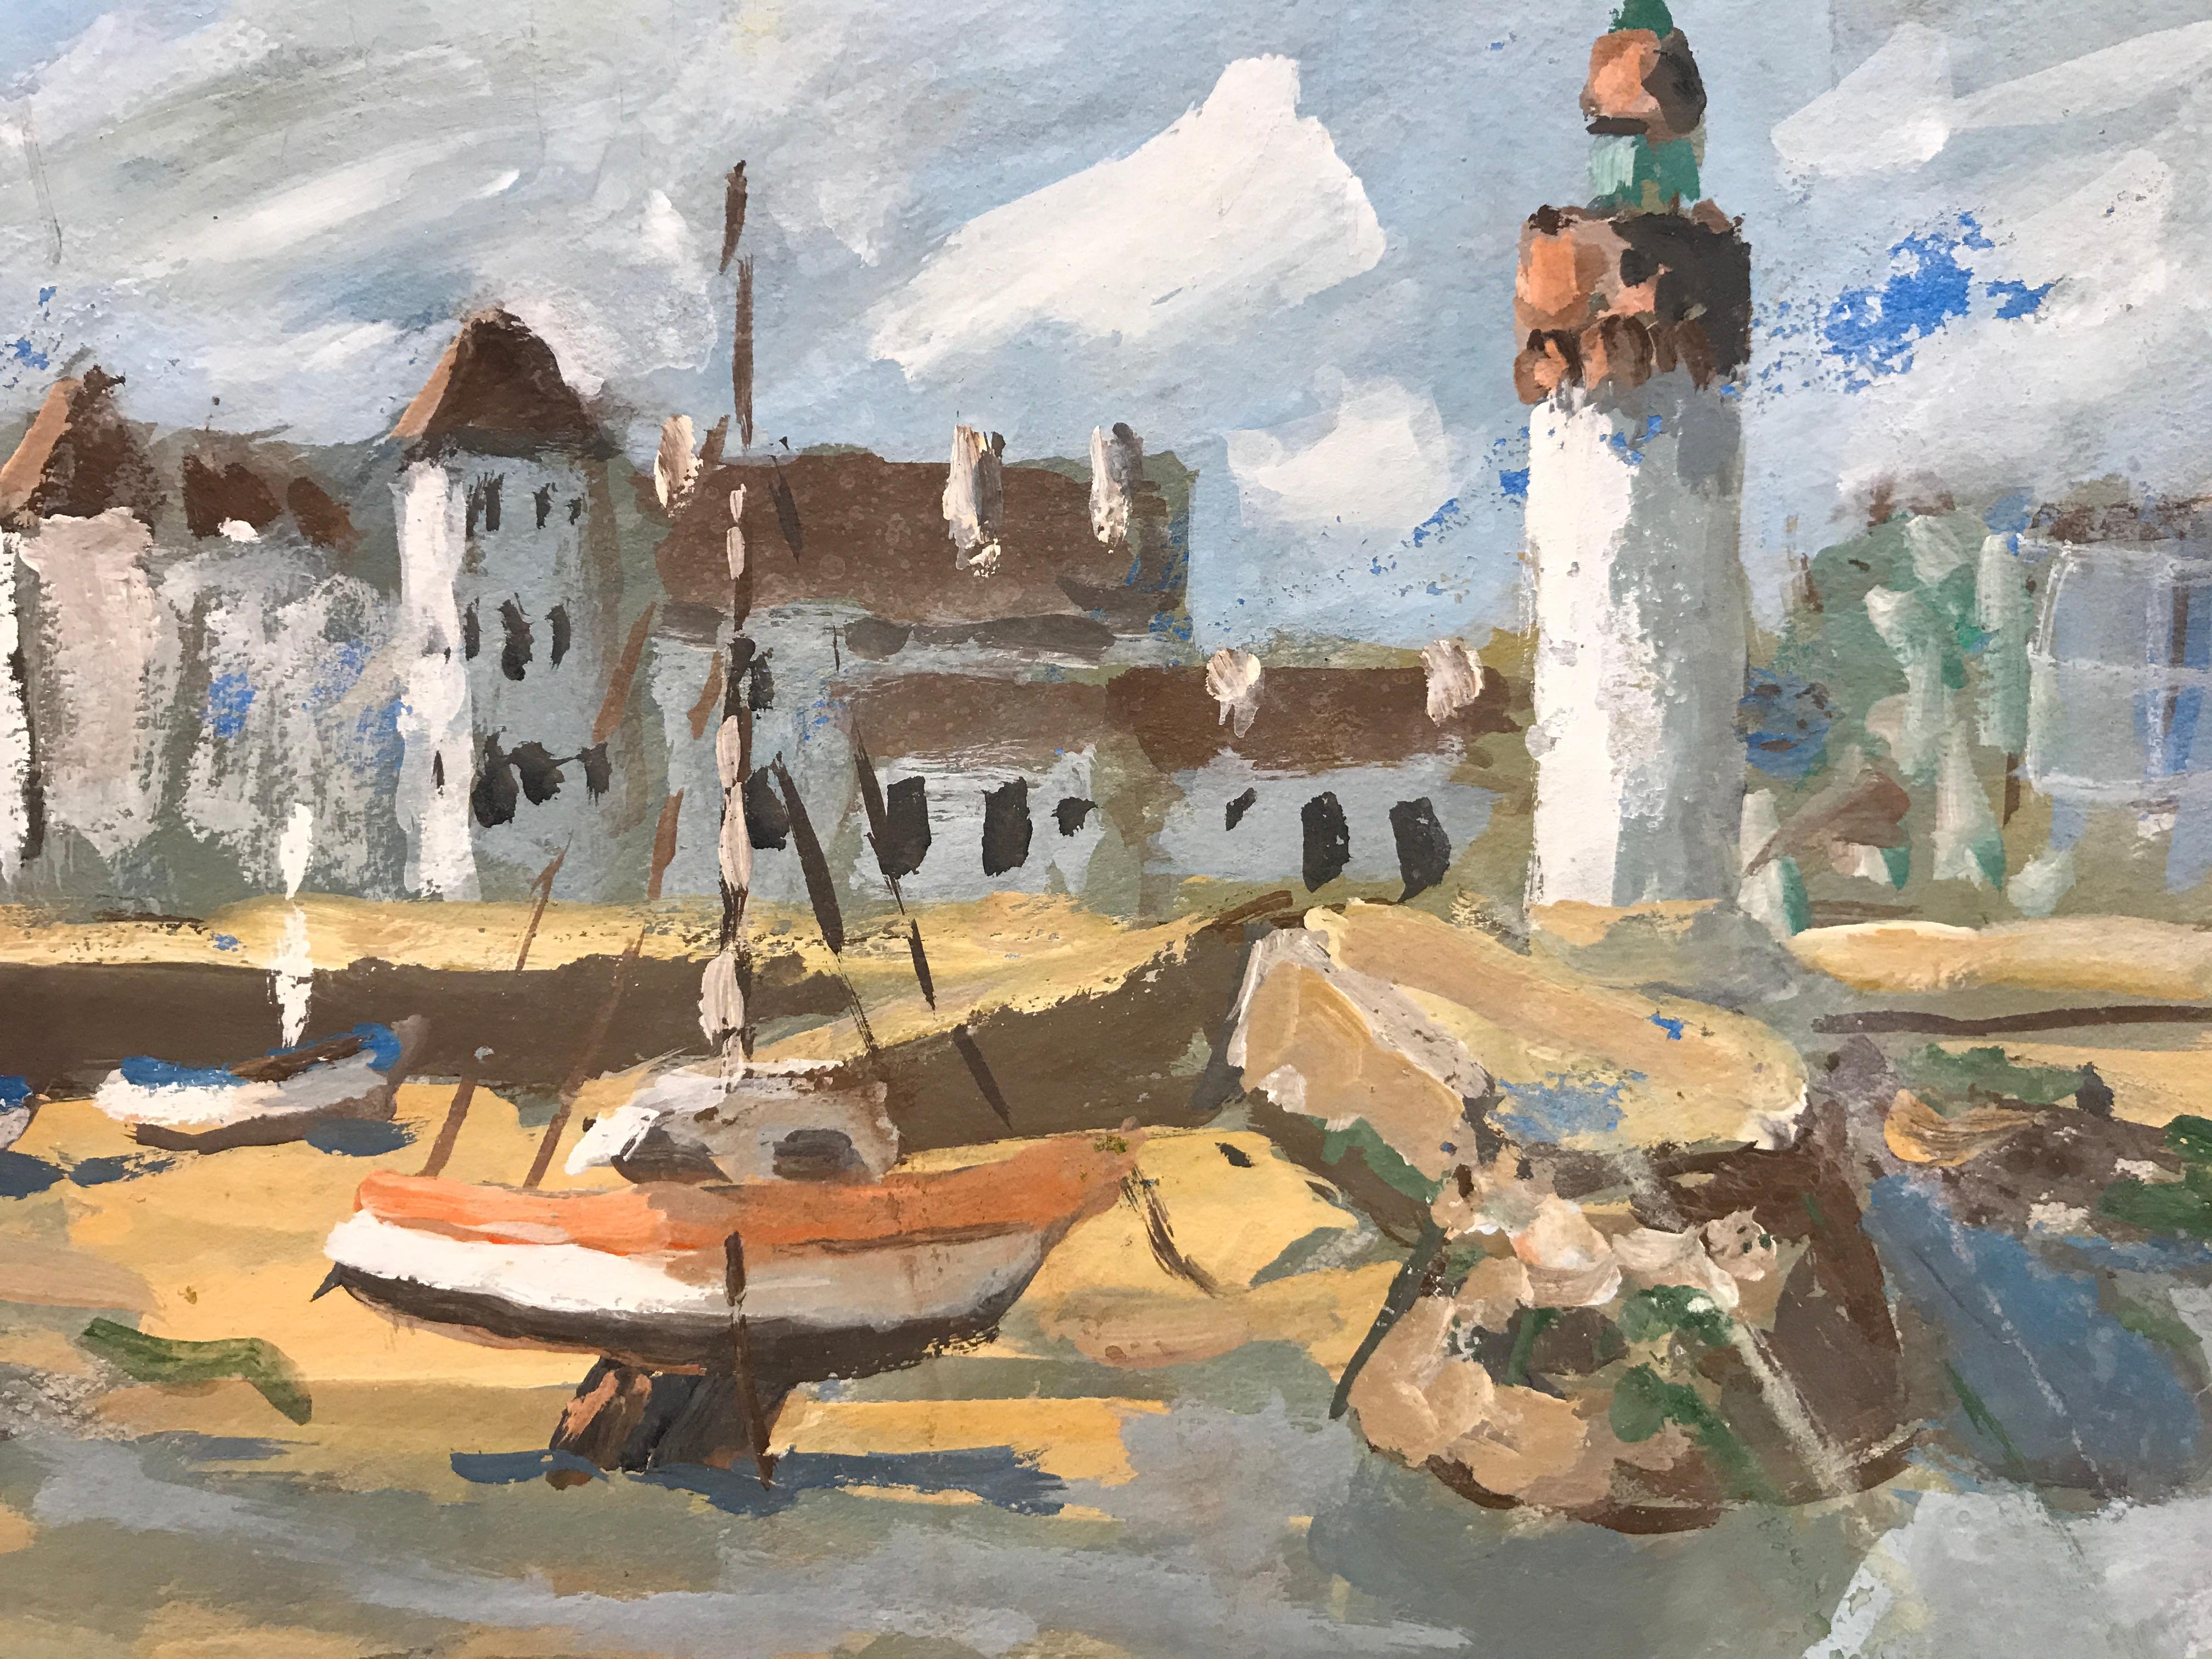 'Port-Haliguen' is a small gouache on board seaside painting created by French Breton artist Fanch Lel in the 21st century. Featuring a vibrant palette made of white, blue, grey, brown and orange tones, the painting depicts the old harbor of